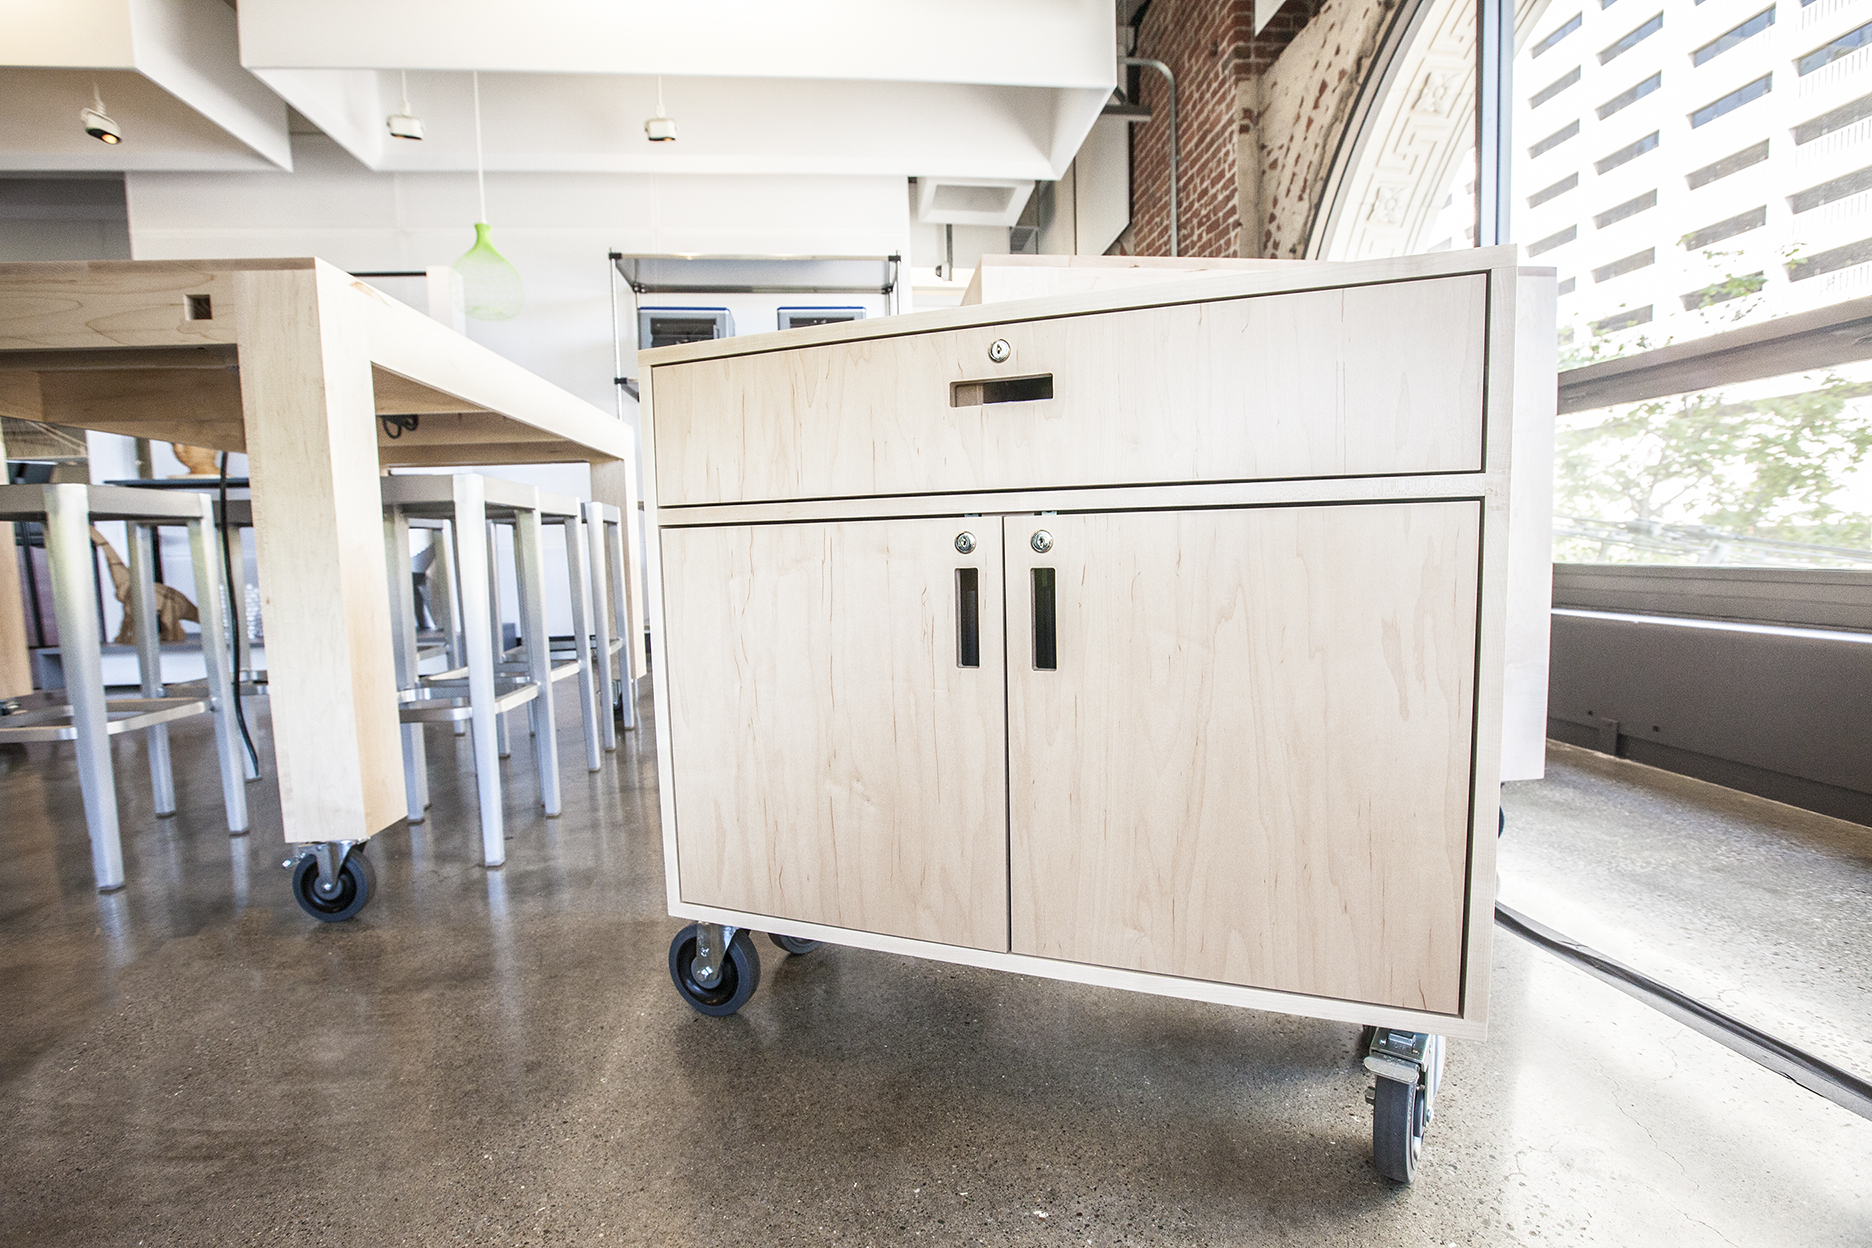  A rolling cabinet designed to hold 14 laptops for the gallery classes. 